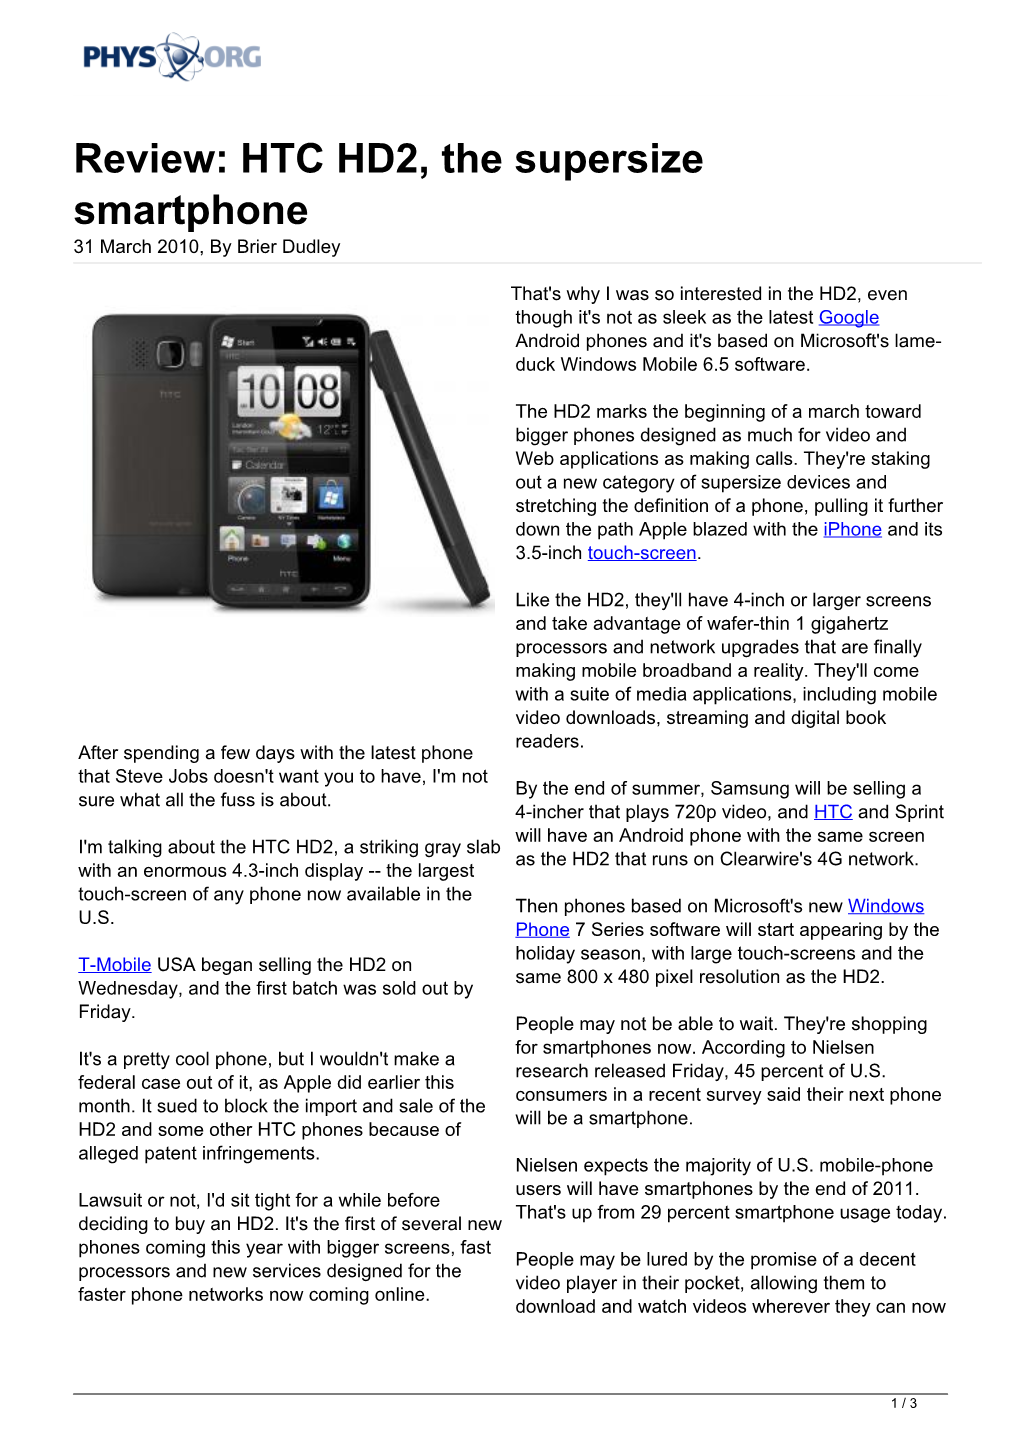 HTC HD2, the Supersize Smartphone 31 March 2010, by Brier Dudley